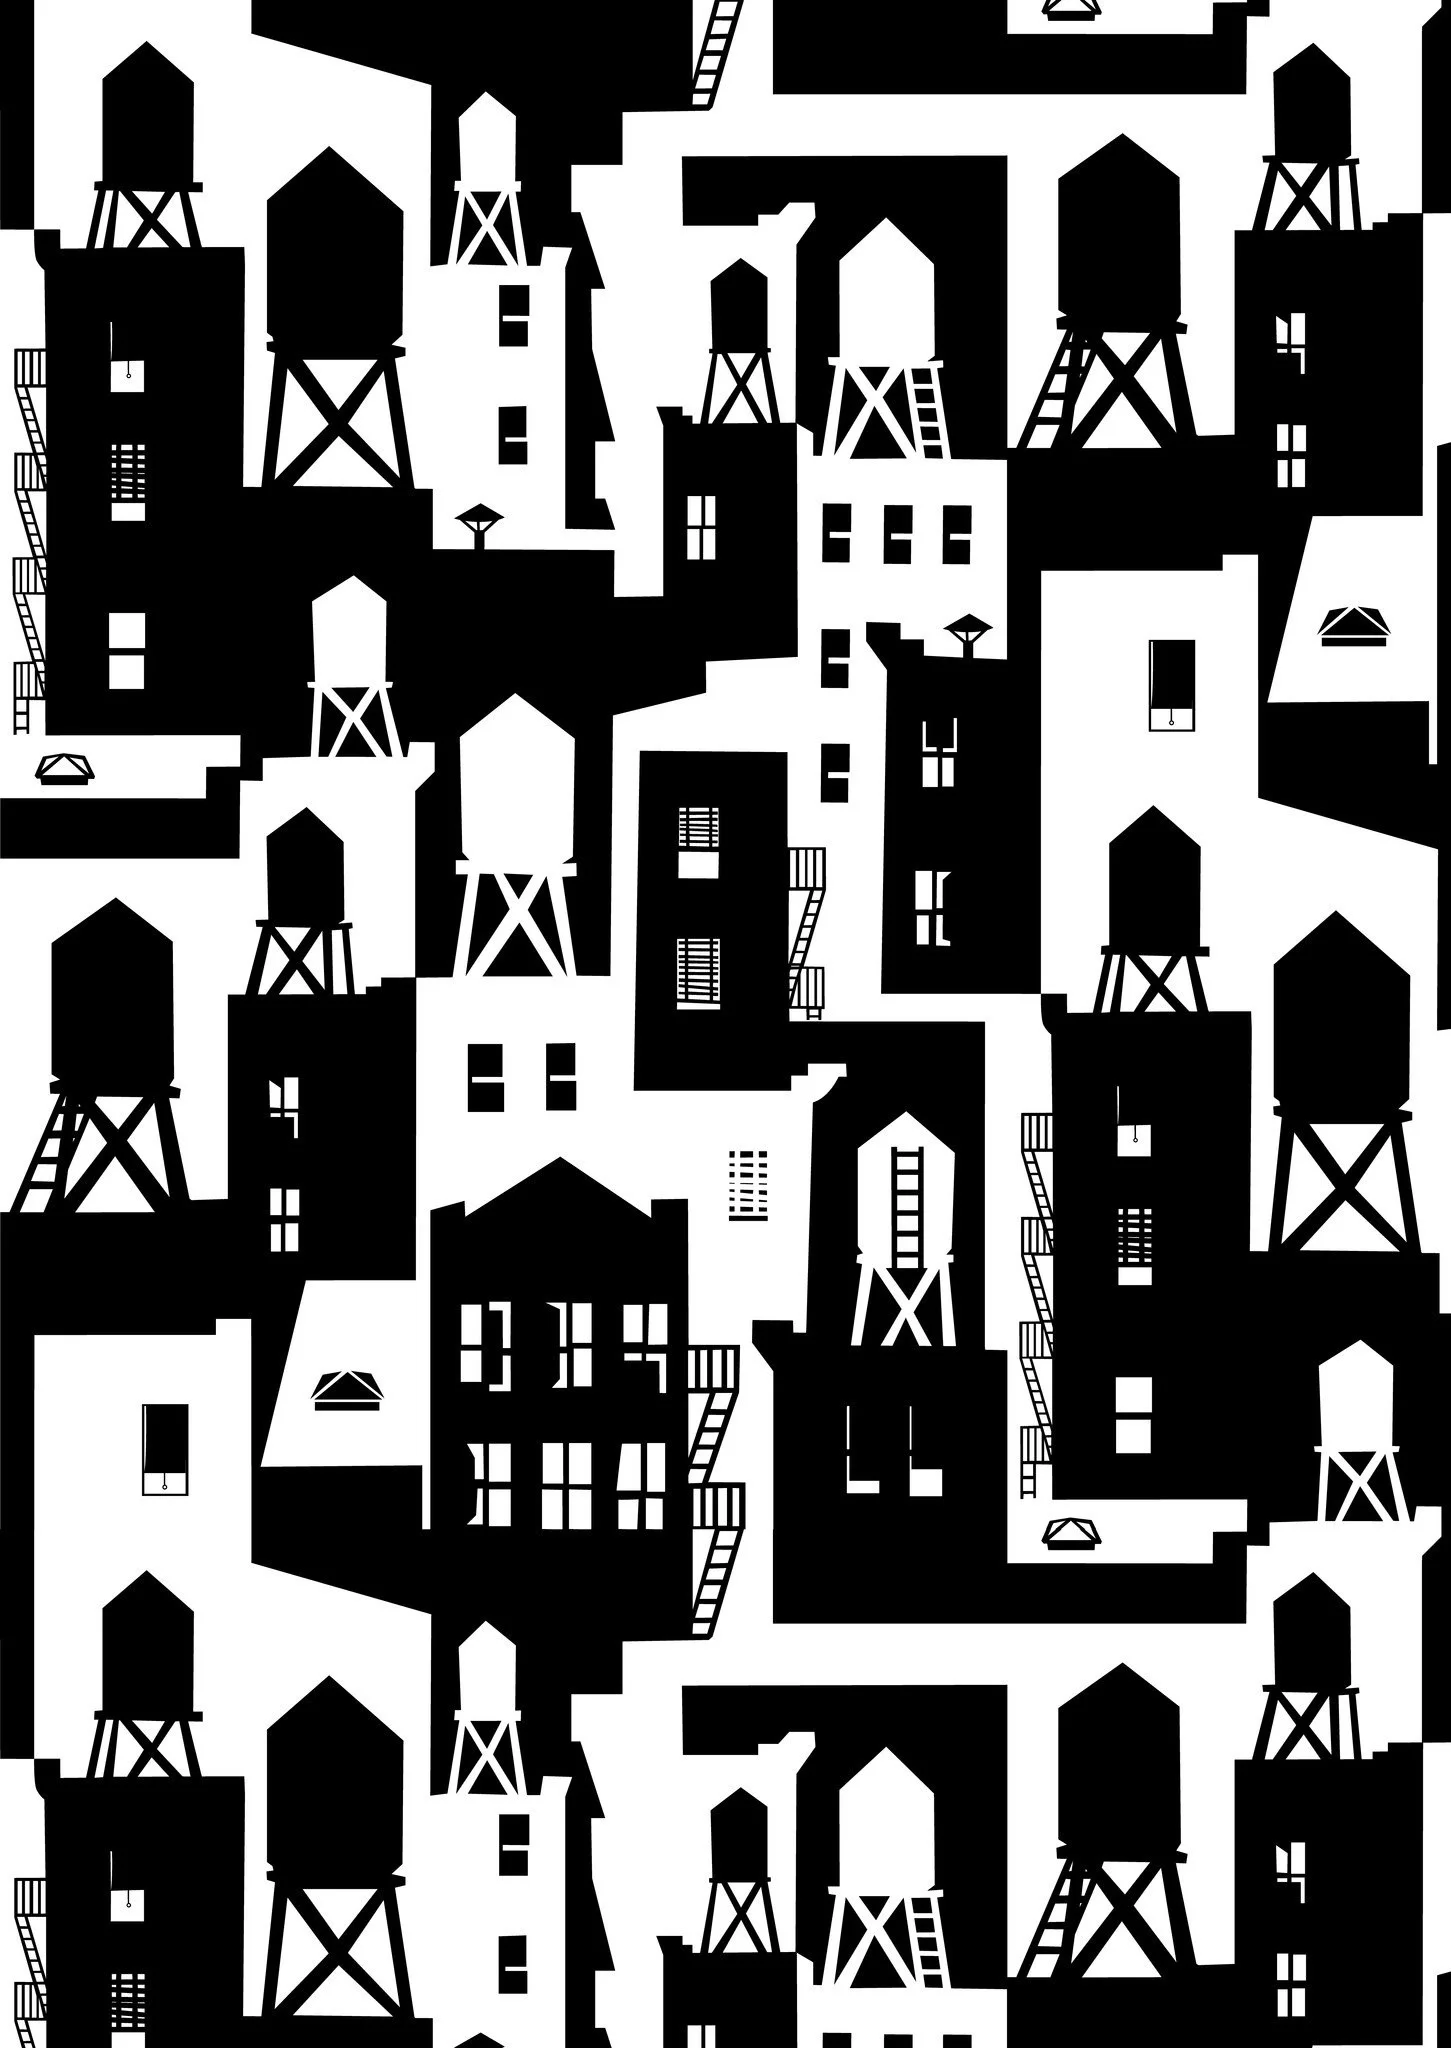 New York City Watertowers Wallpaper in Black & White design by Tom  Slaughter for Cavern Home